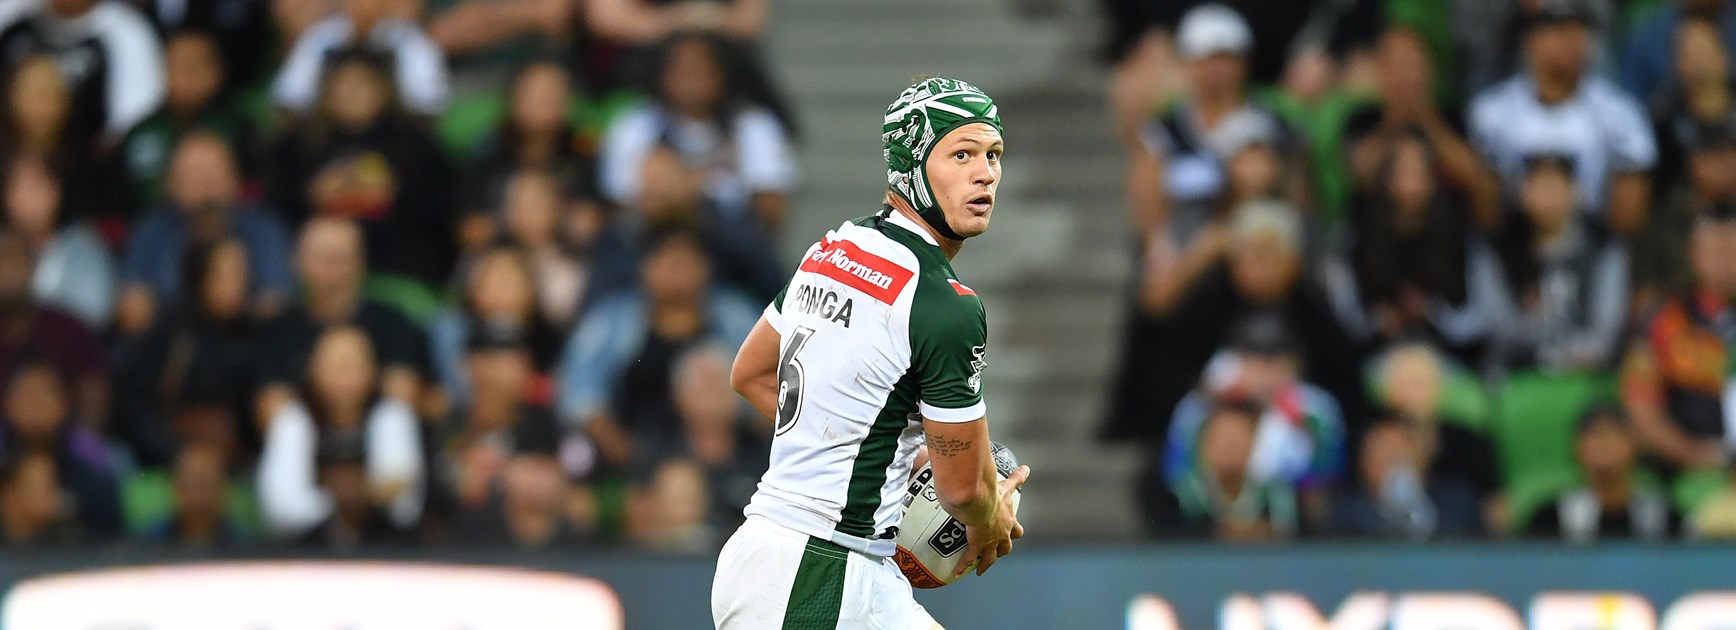 "Just give it time": Brown's faith in Ponga